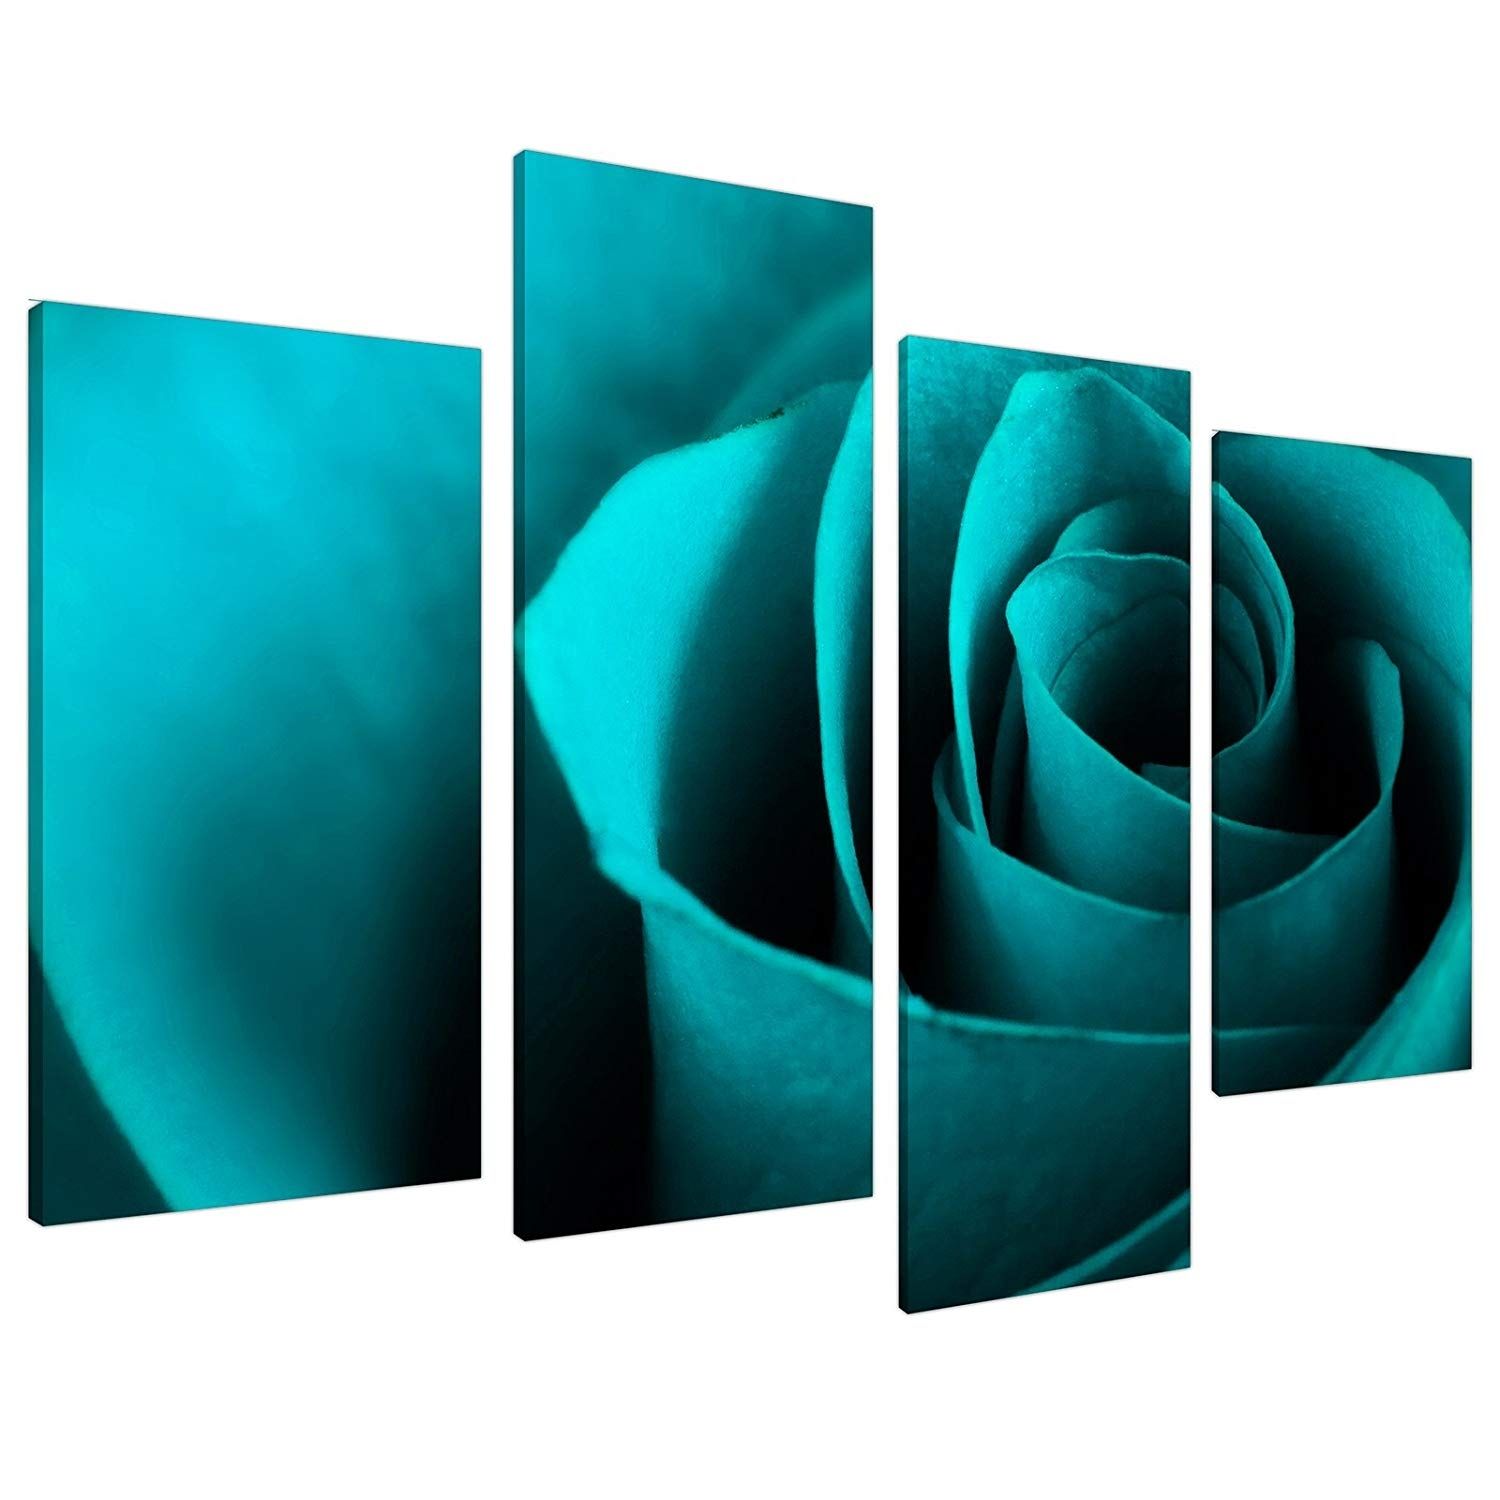 Large Teal Turquoise Floral Canvas Wall Art Pictures Xl Prints 4109 Regarding Turquoise Wall Art (View 6 of 20)